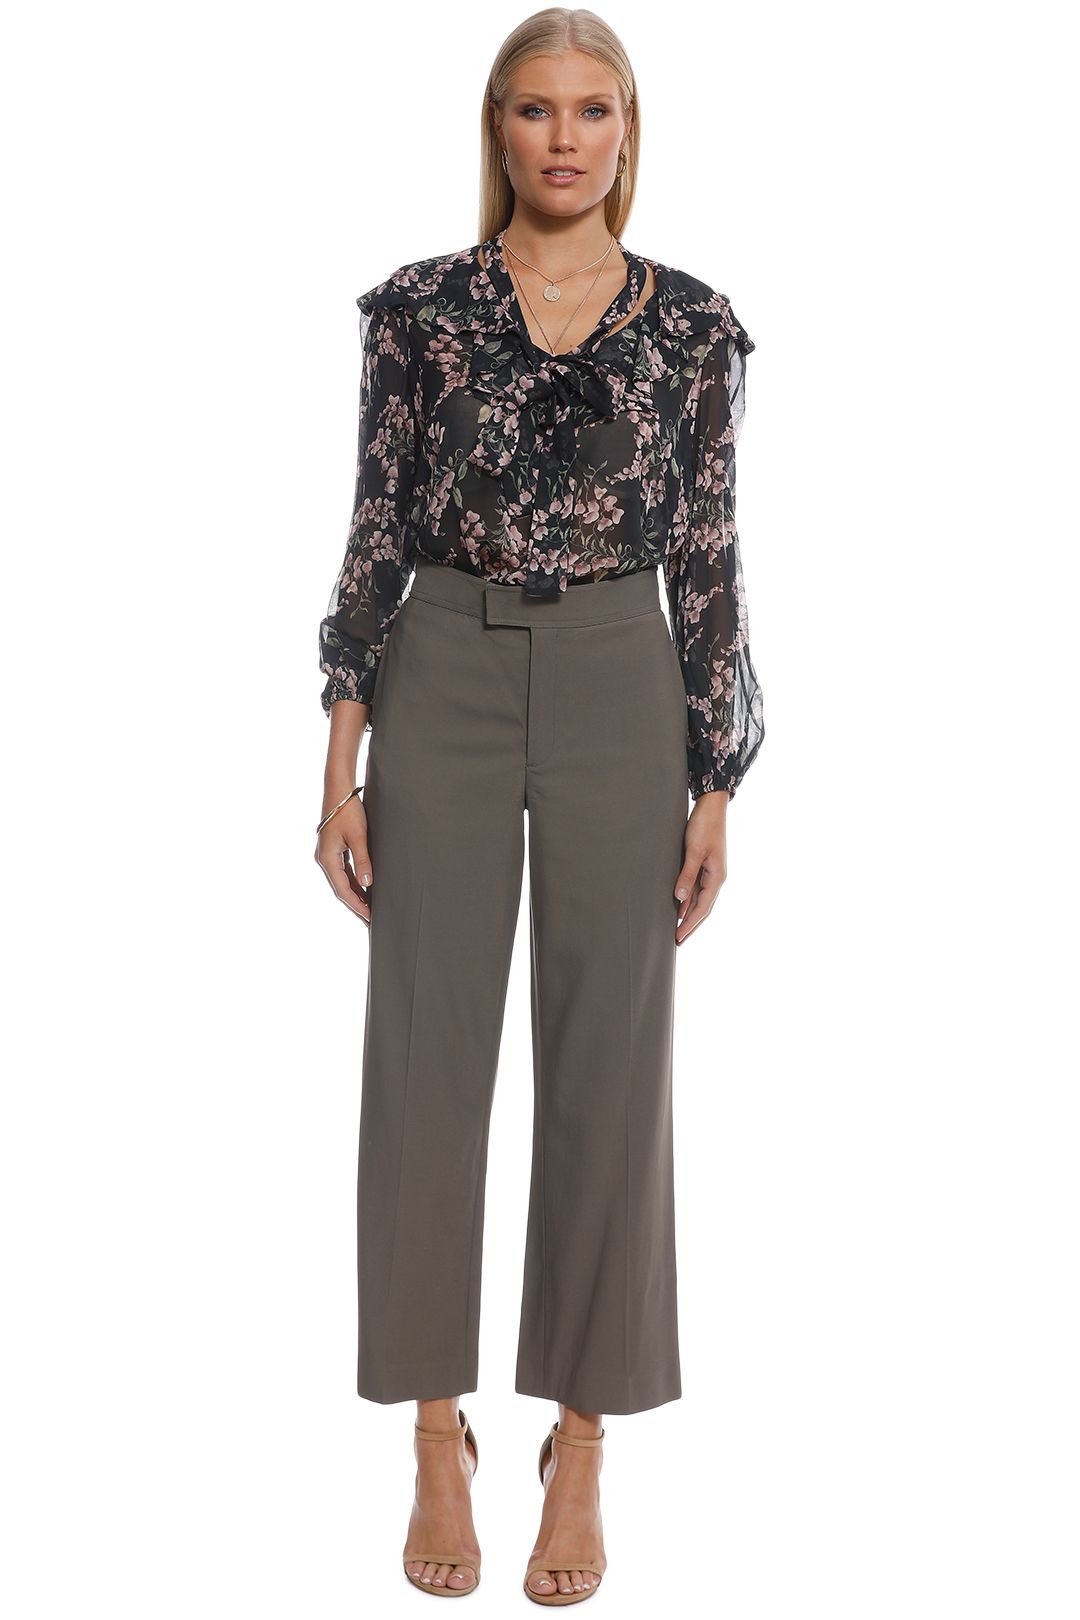 Scanlan Theodore - Crepe Tailored Trouser - Taupe - Front